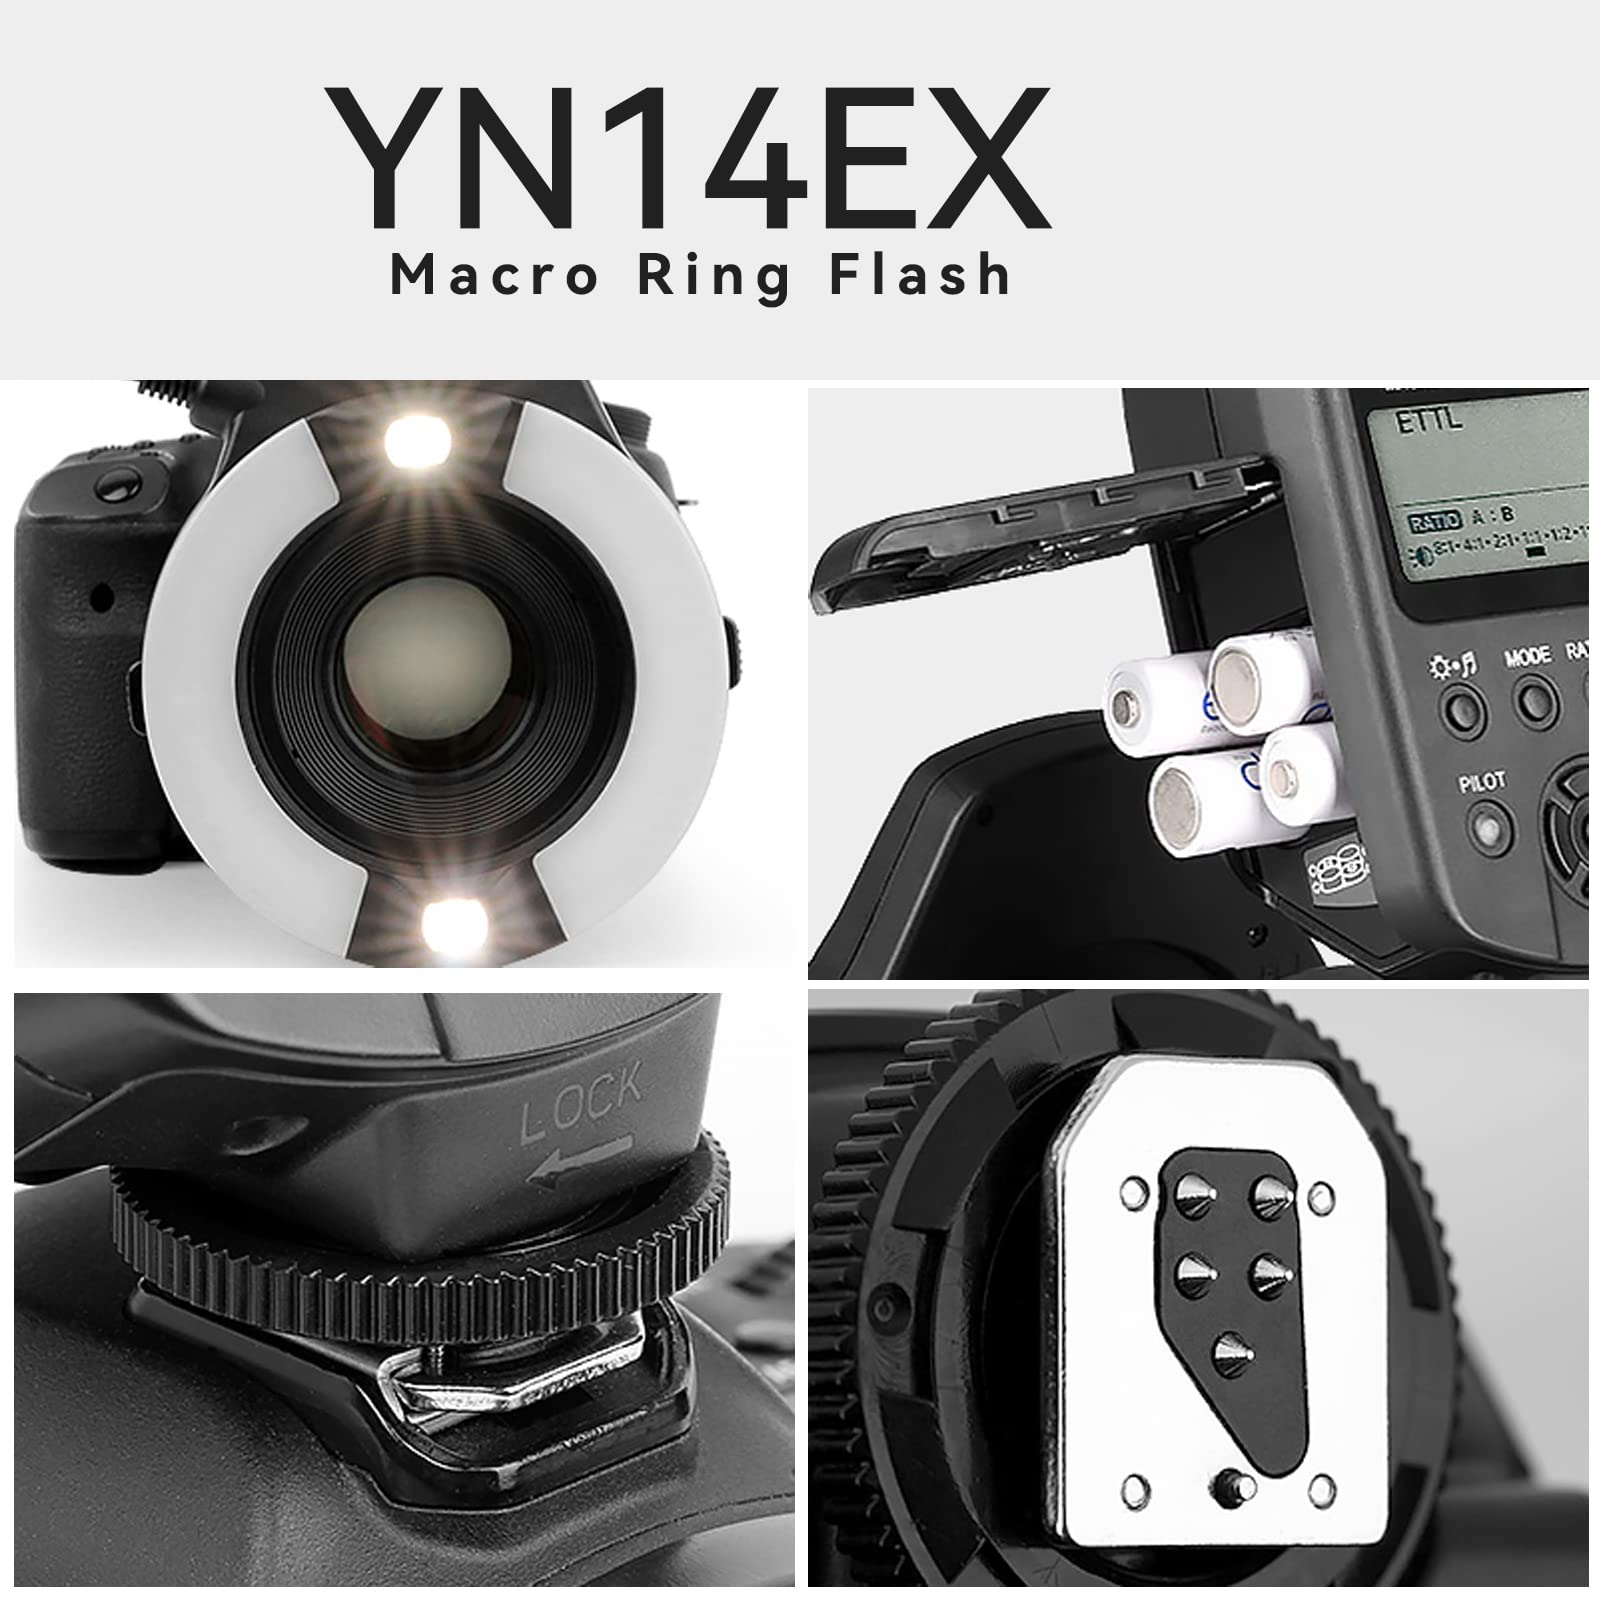 YONGNUO YN-14EX YN14EX TTL Macro Ring Flash, LED Flash Light with Adapter Ring for Canon EOS DSLR Cameras, as Canon MR-14EX